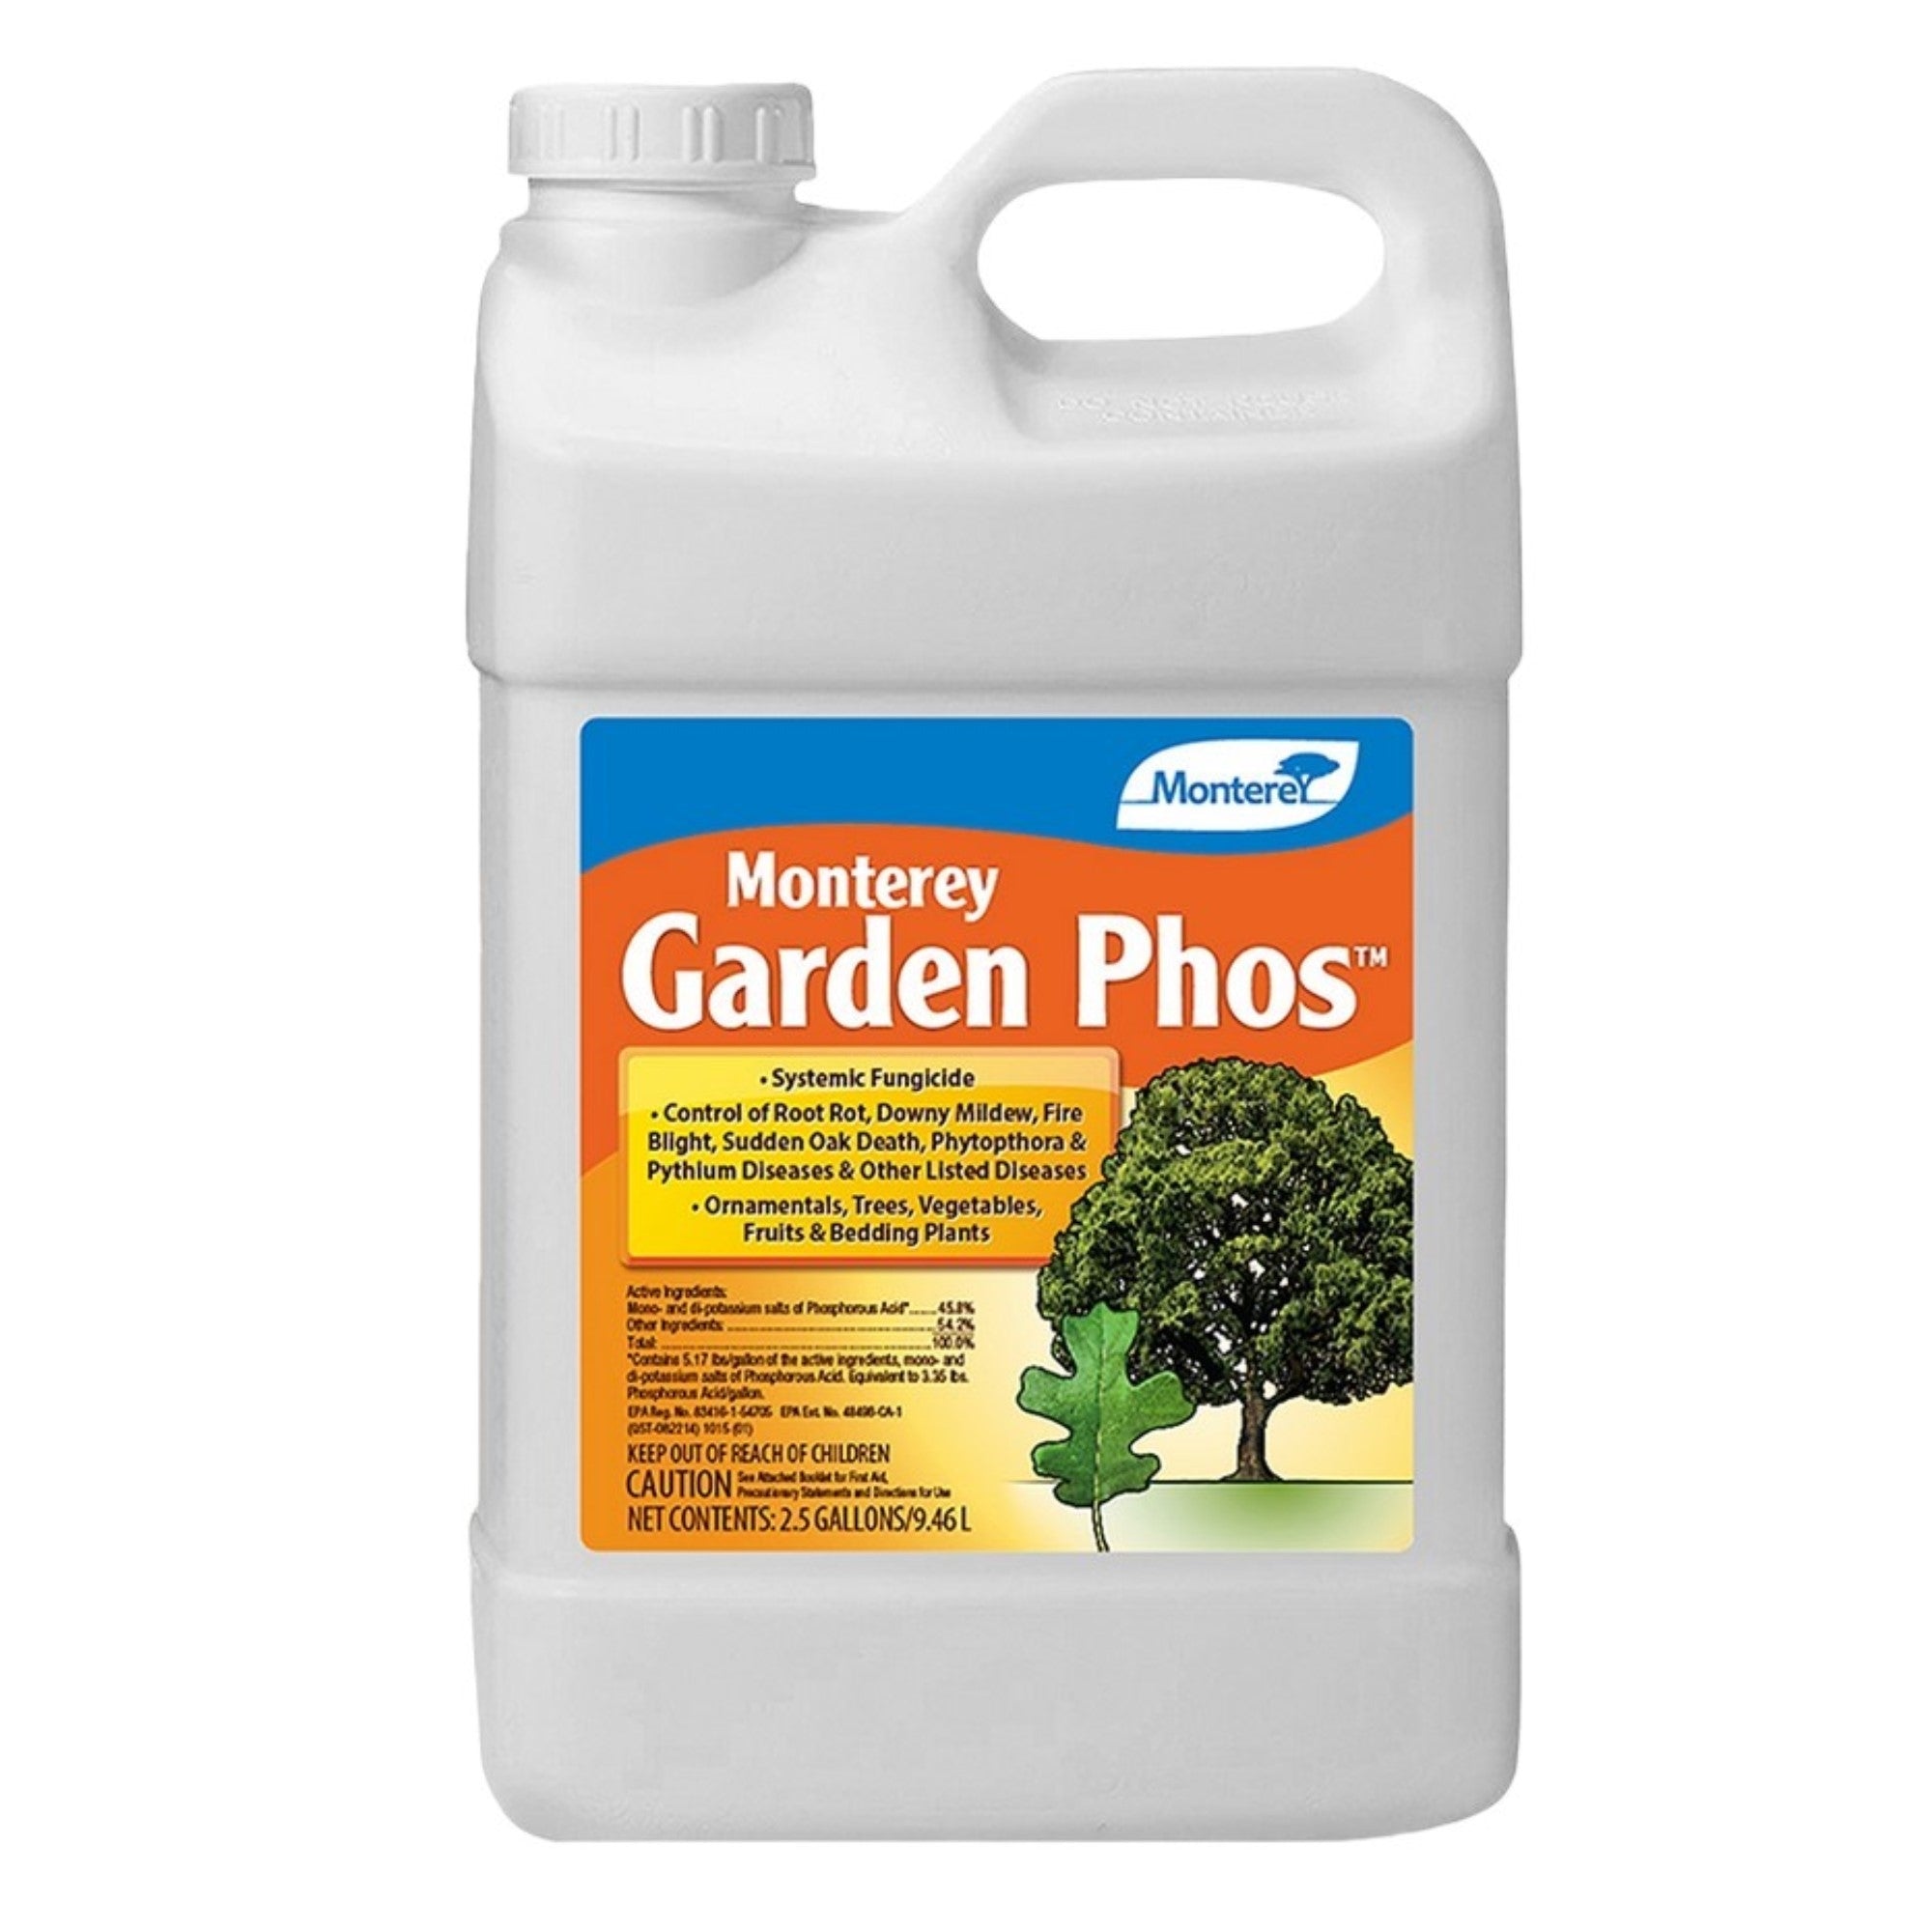 Monterey Garden Phos Systemic Fungicide, 2.5 Gallons